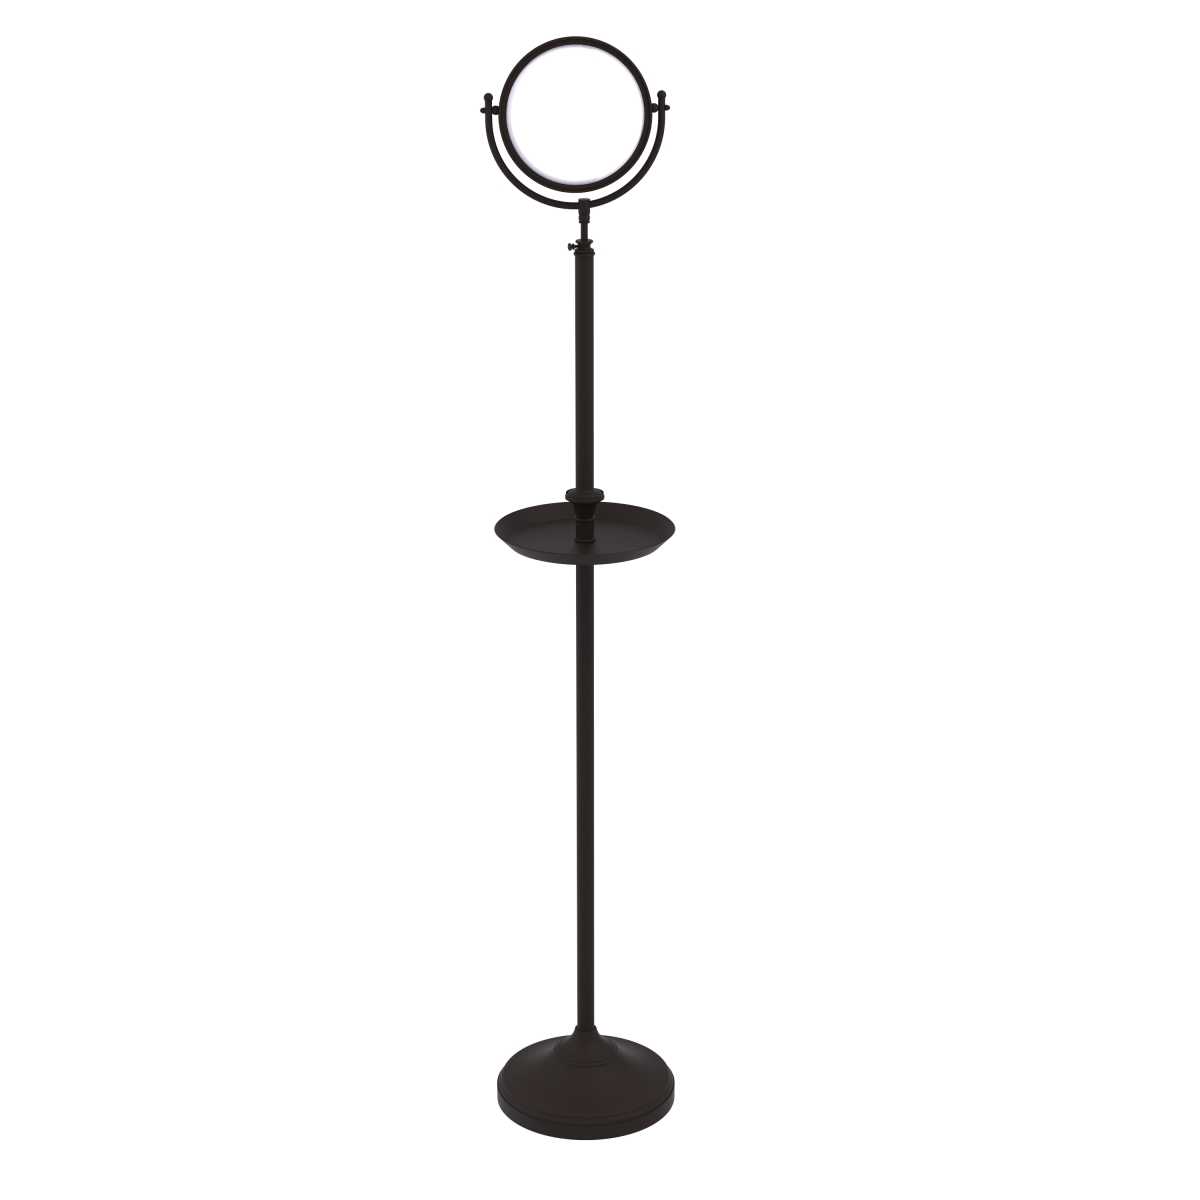 Allied Brass DMF-3-4X-ORB Floor Standing Make-Up Mirror 8 in. dia. with 4X Magnification & Shaving Tray, Oil Rubbed Bronze